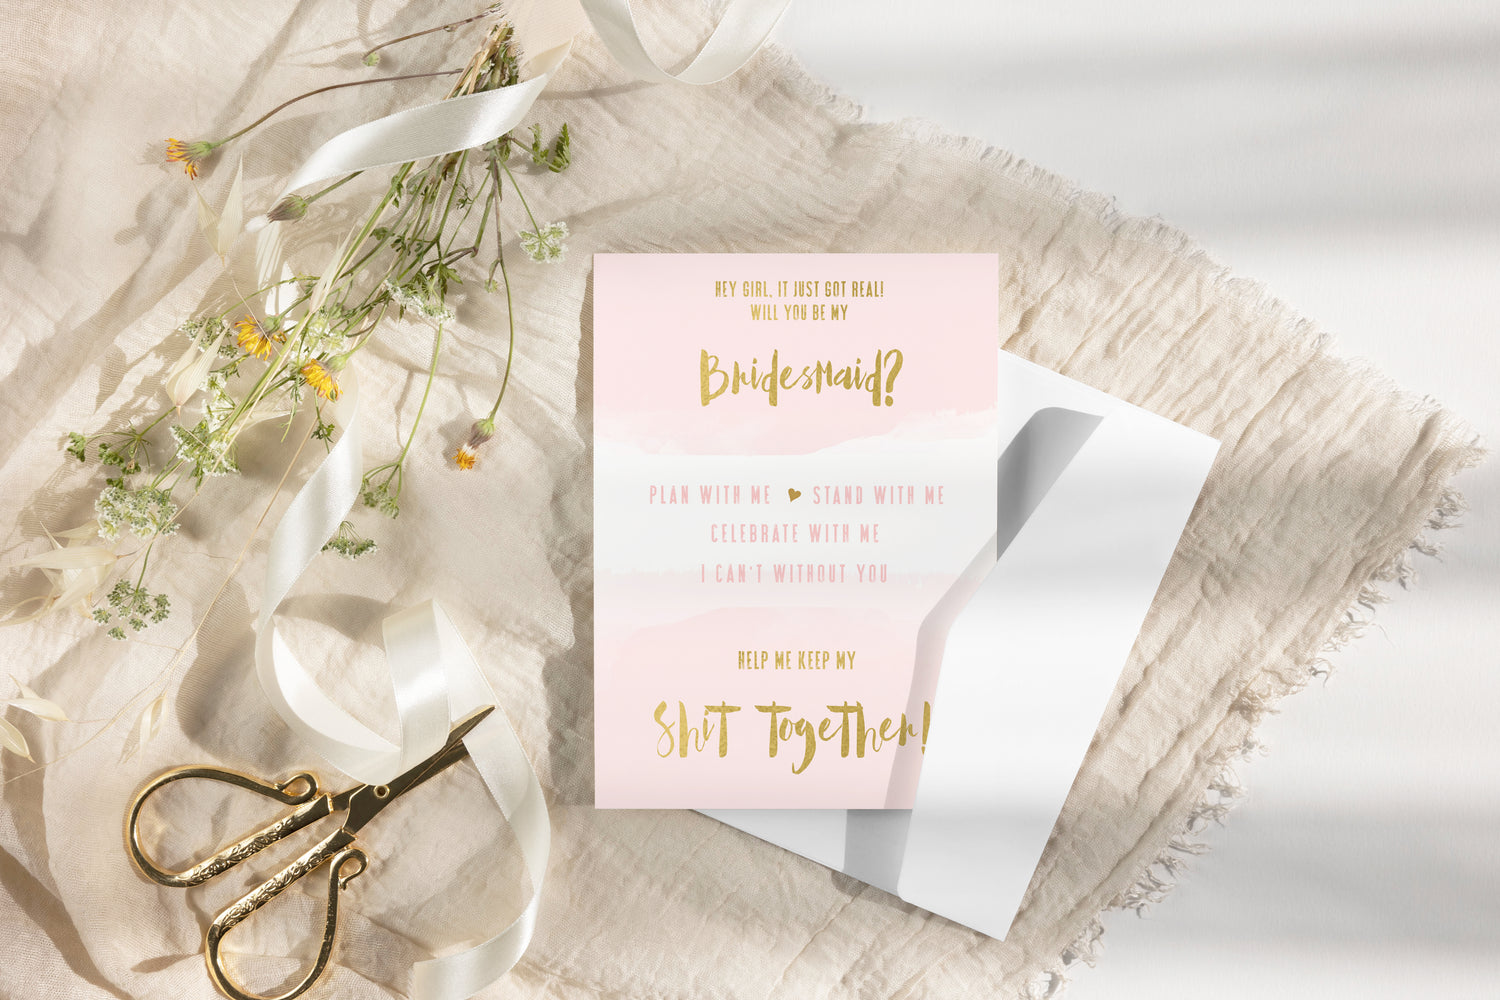 Express your gratitude with our exquisite bridesmaid cards. Each card offers a heartfelt message and a touch of elegance, perfect for asking ‘Will you be my bridesmaid?’ in style.